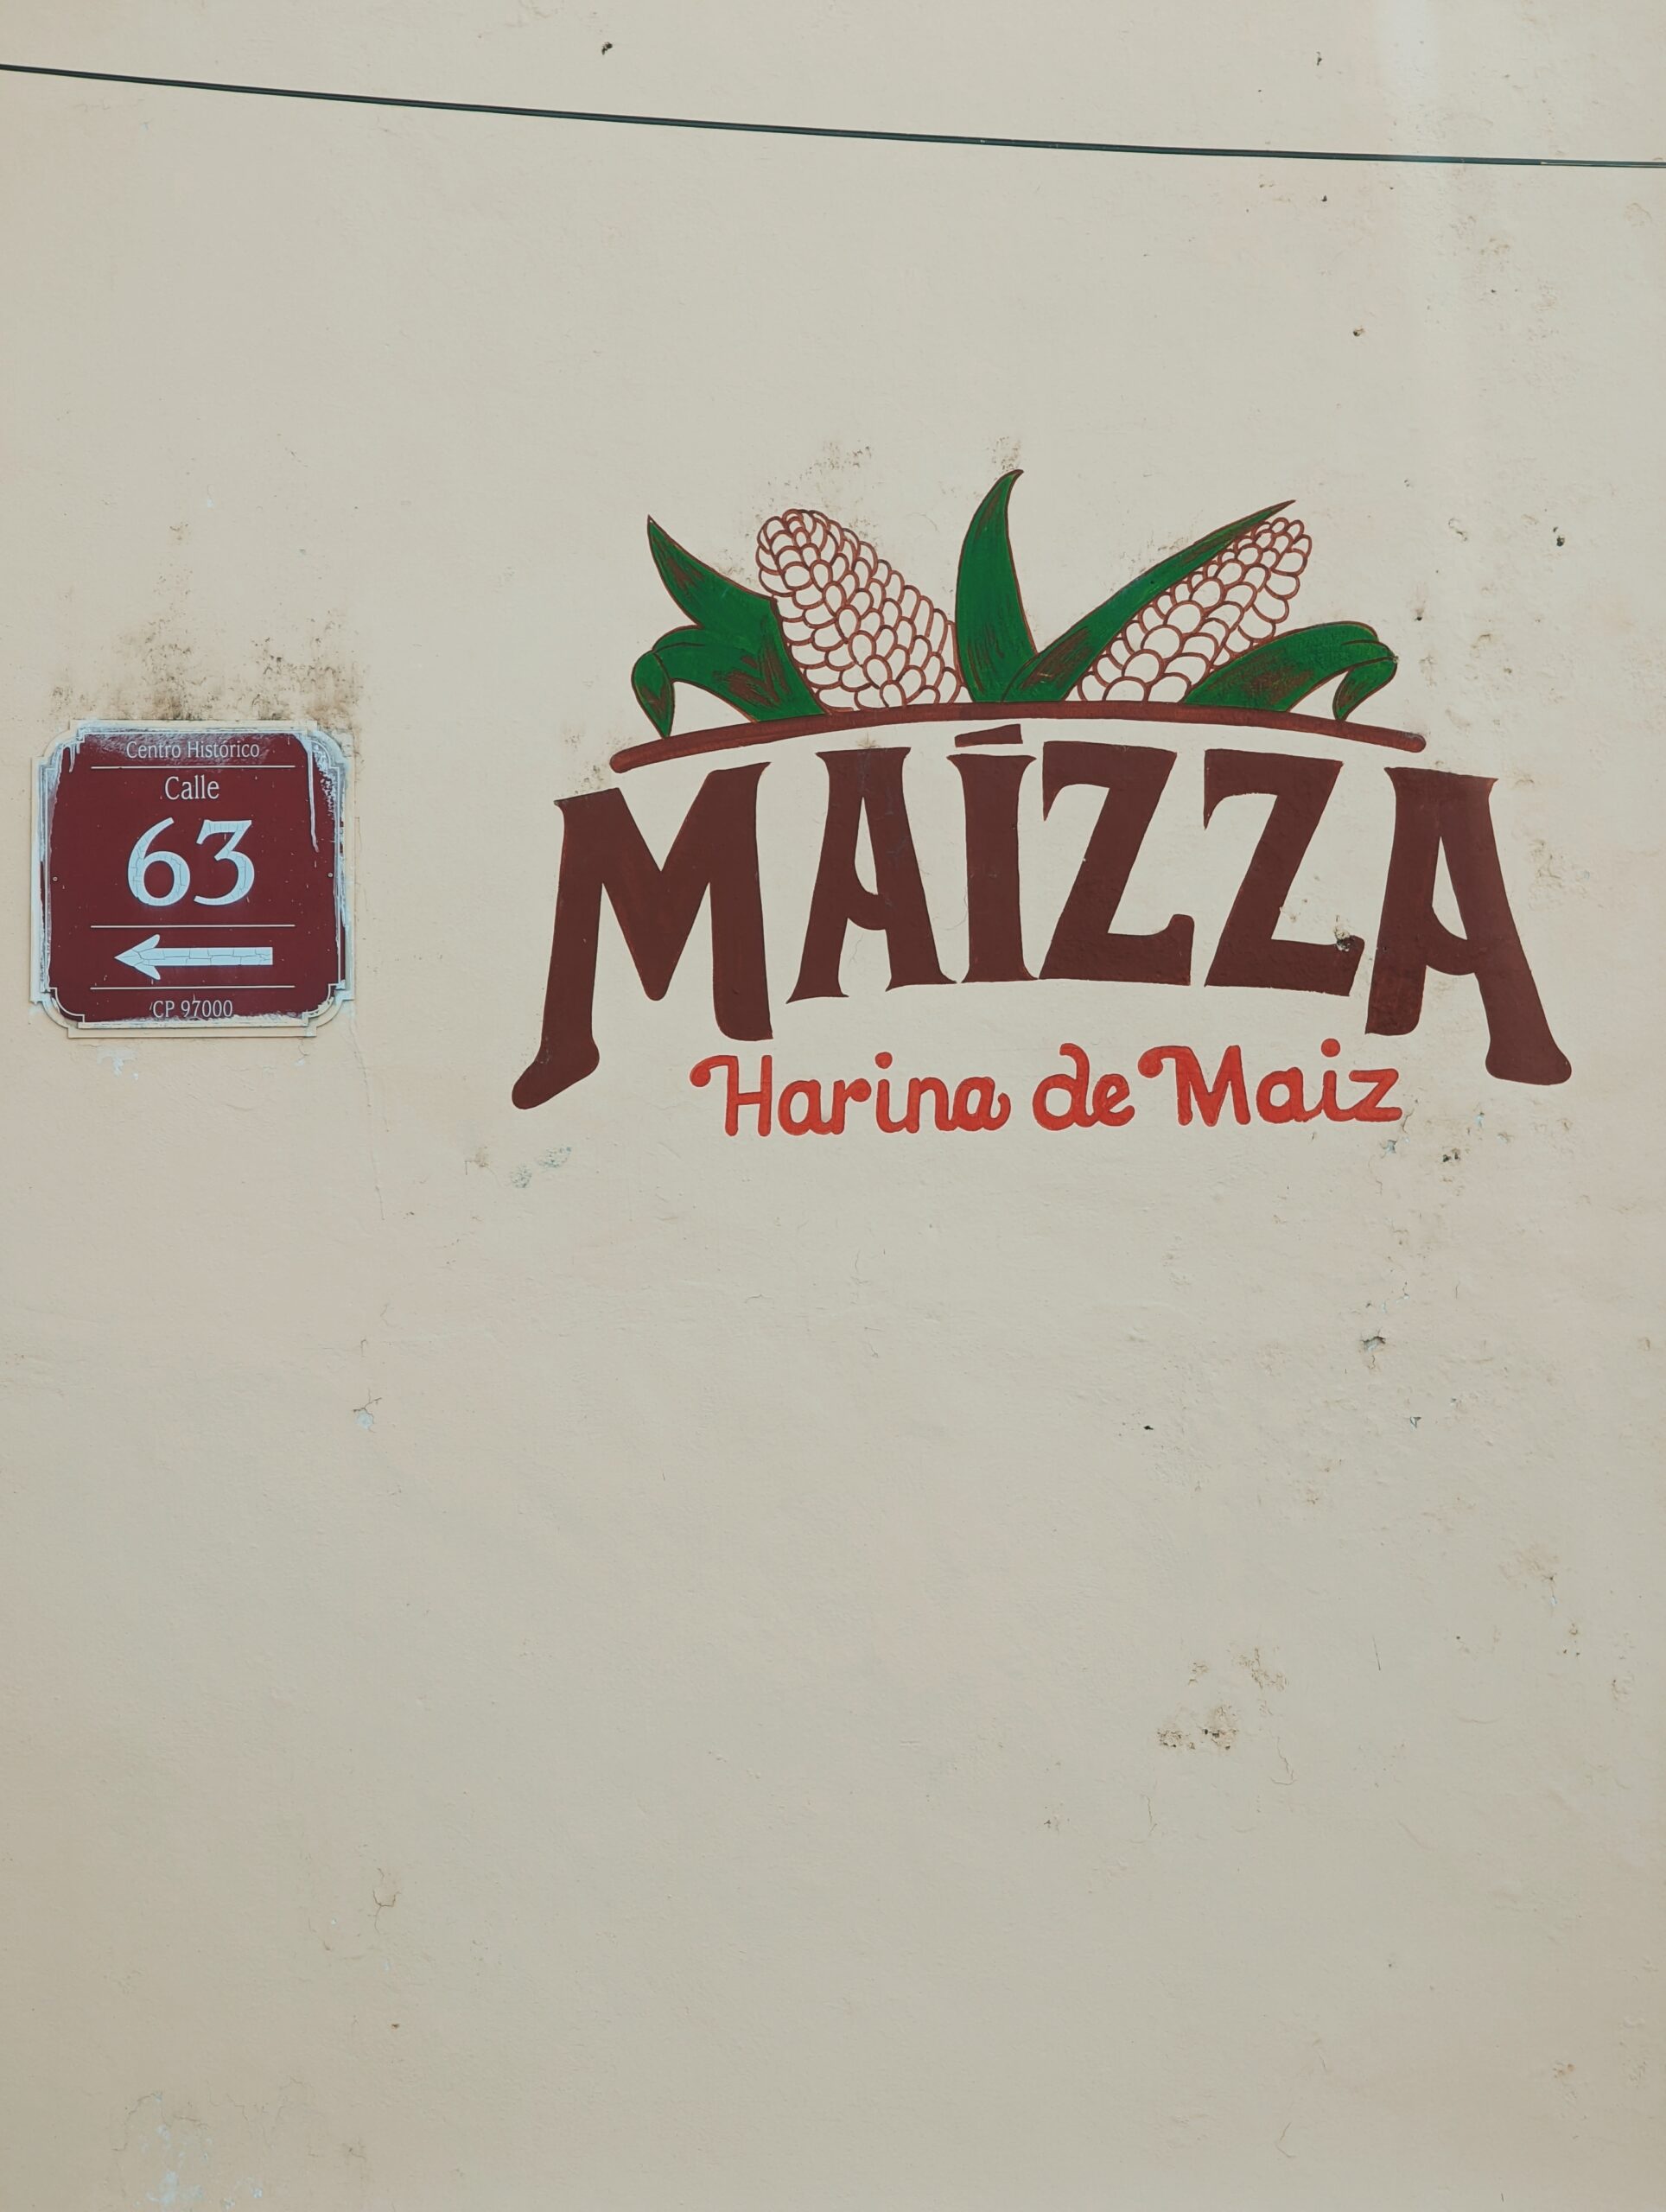 Painted logo on a wall in Calle 63 in Mérida, Mexico saying "Maizza—Harina de Maiz"